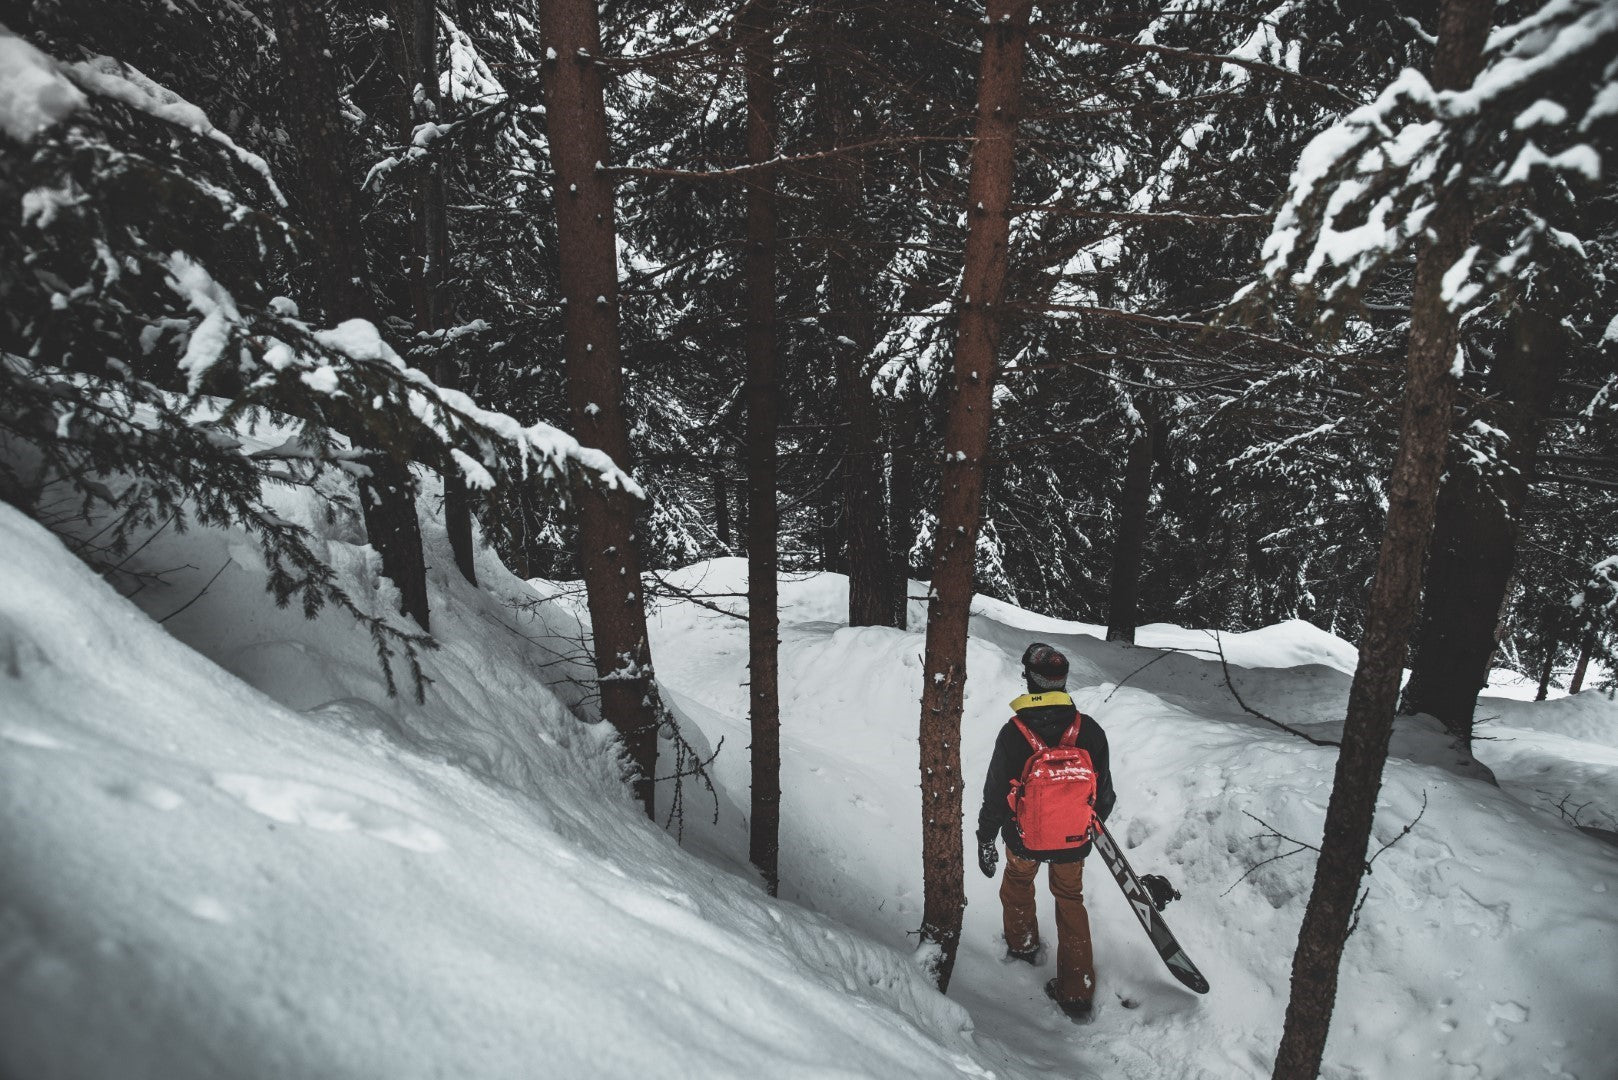 Essentials you need to pack for a ski trip